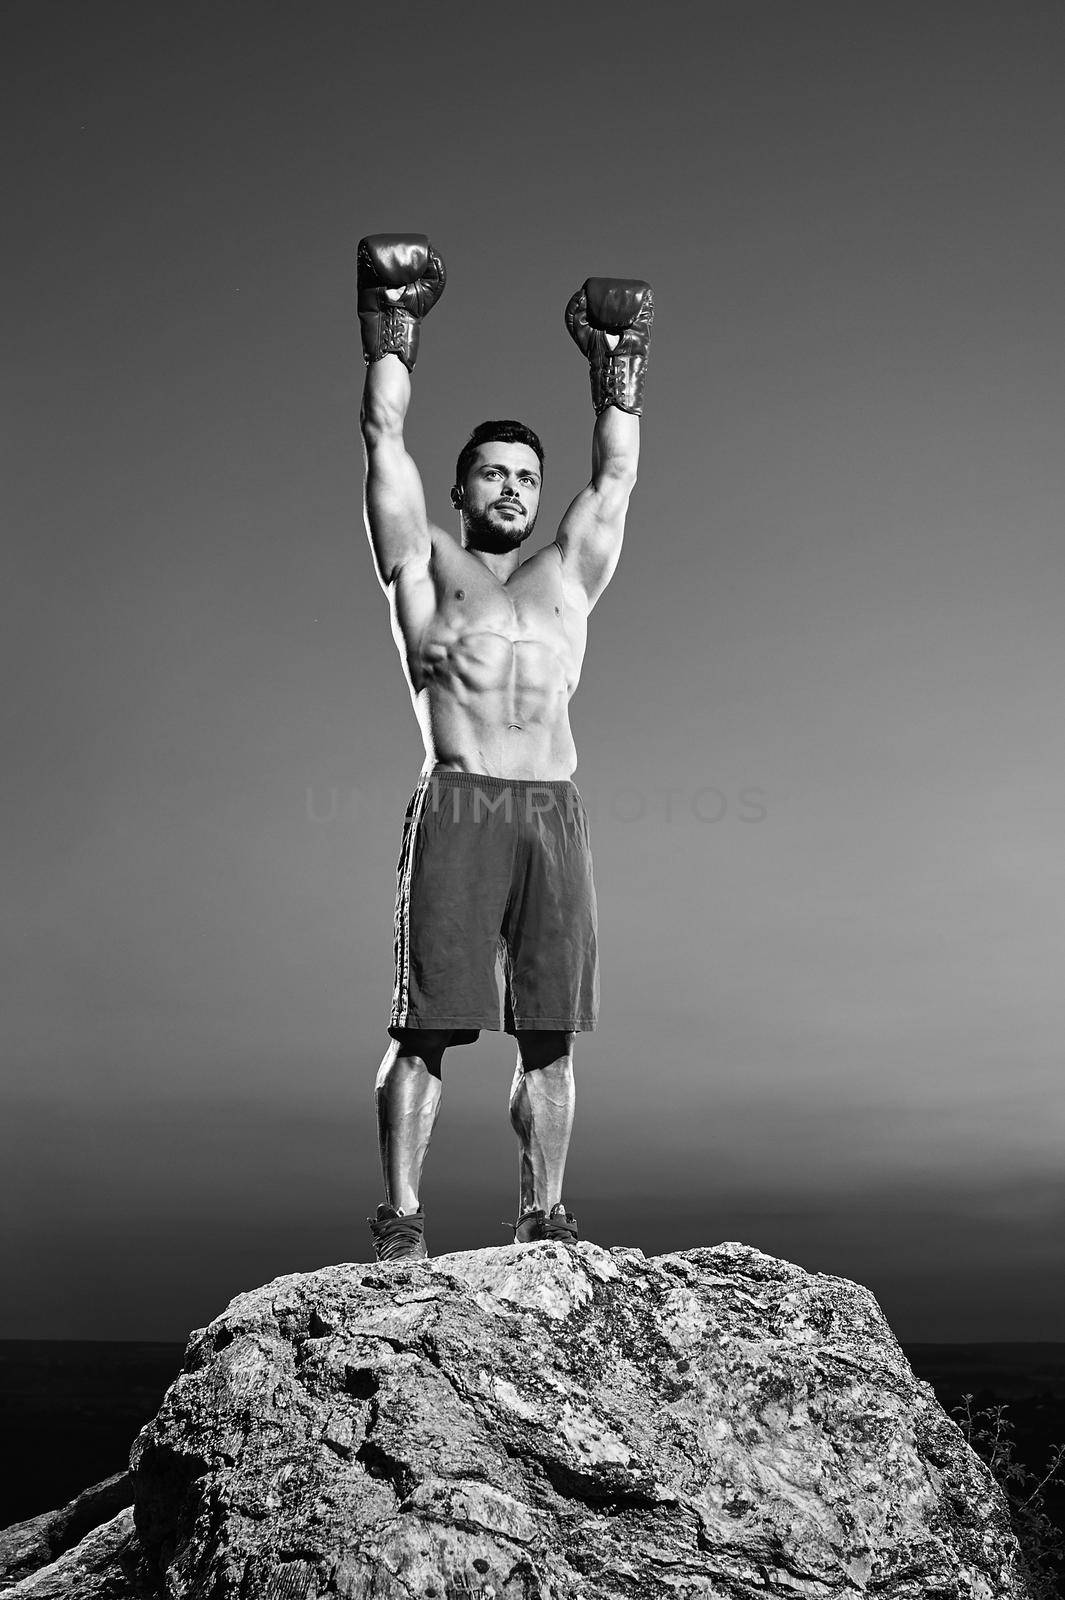 Full length vertical monochrome portrait of a boxing champion celebrating winning posing outdoors standing on top of a rock raising his arms in victory lifestyle achieving winner sports motivation.